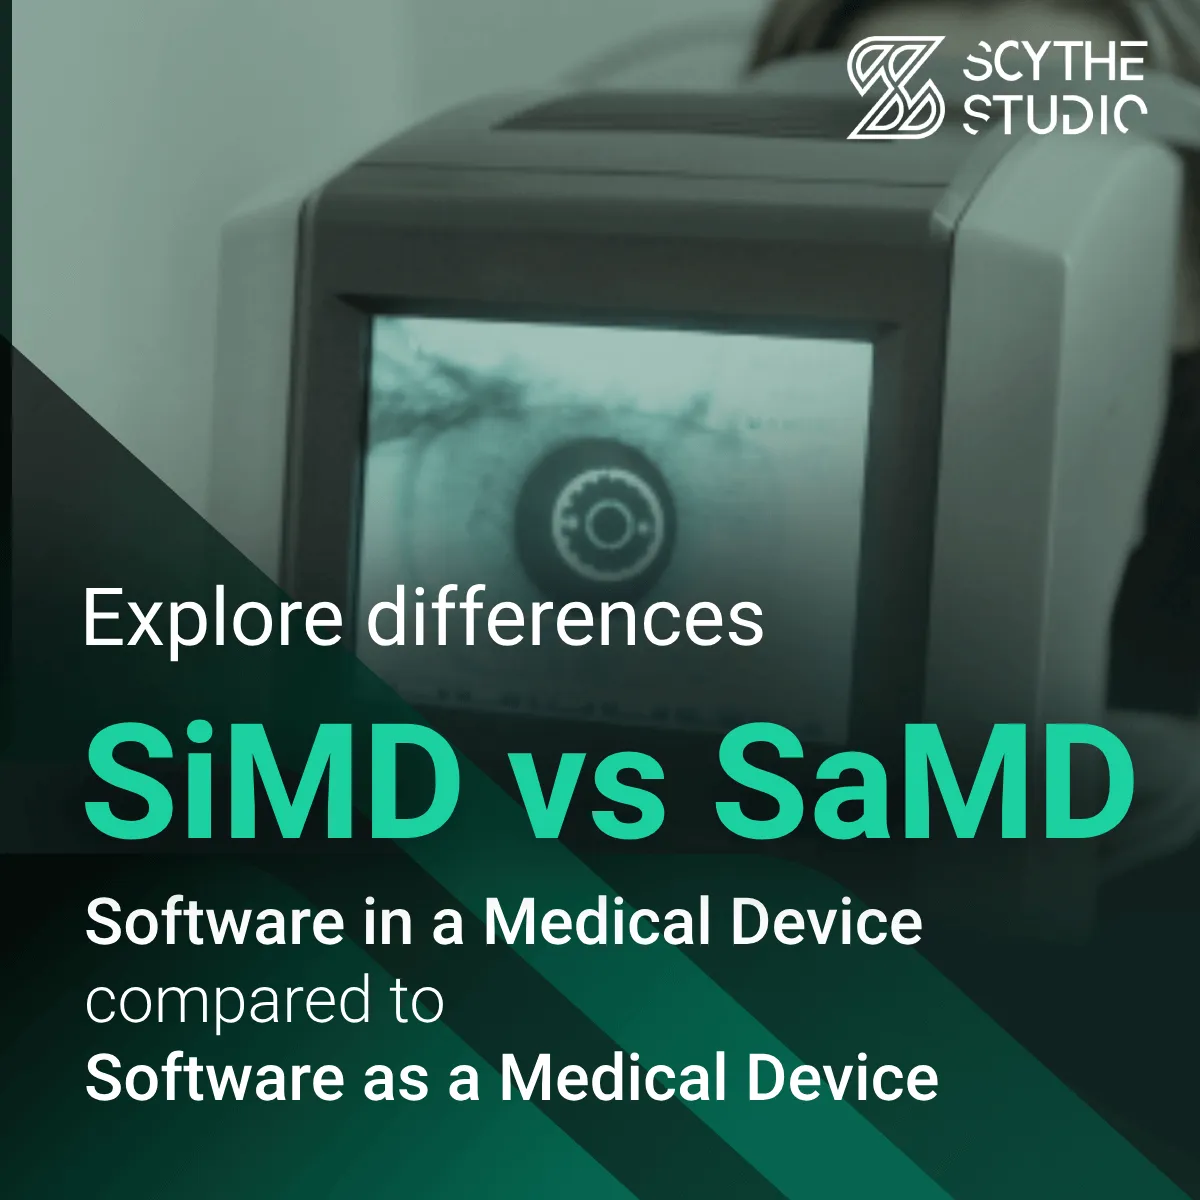 Software in a Medical Device (SiMD) vs Software as a Medical Device (SaMD)